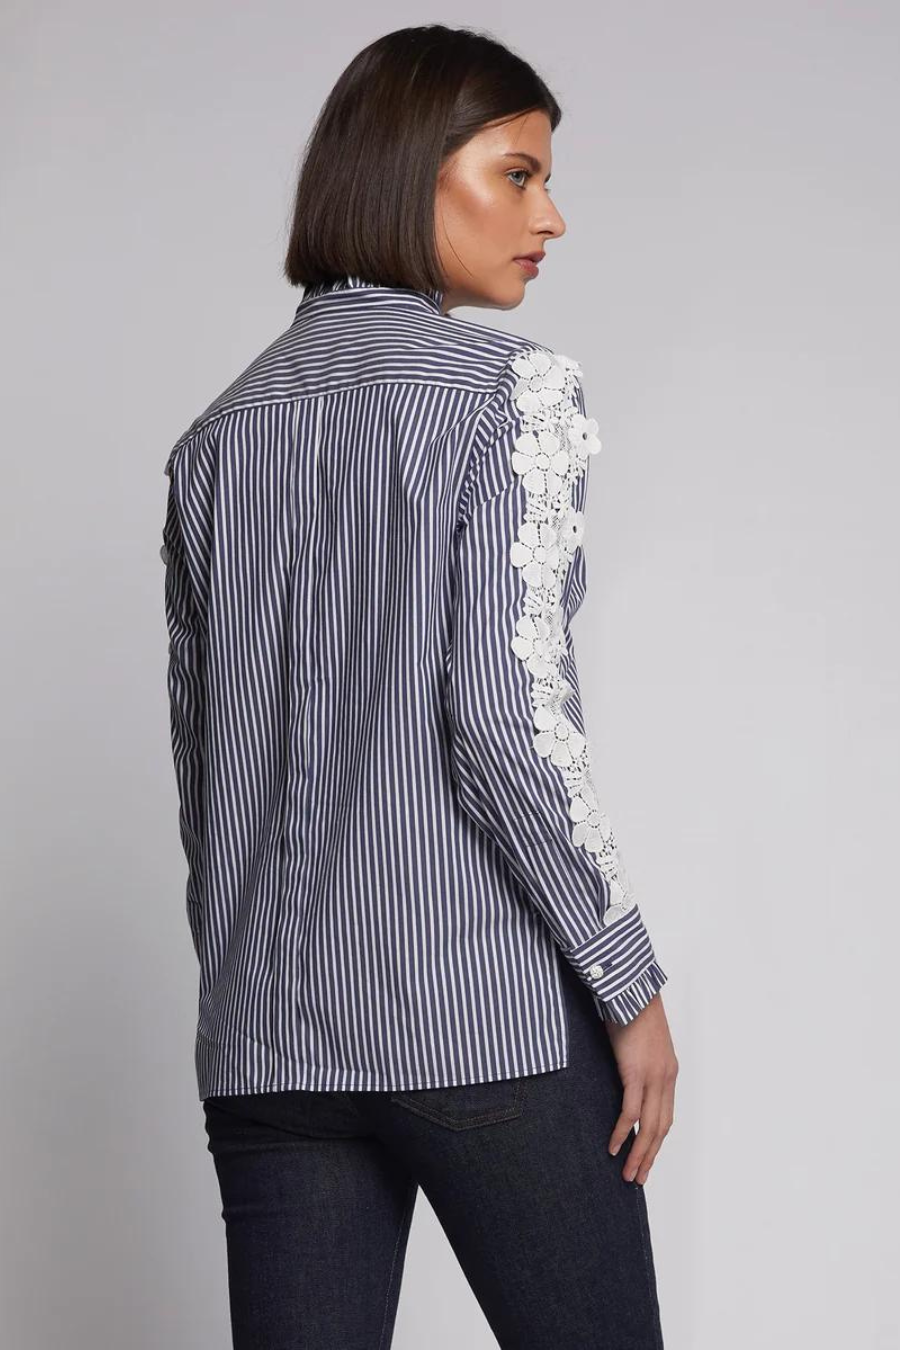 blouse1.png